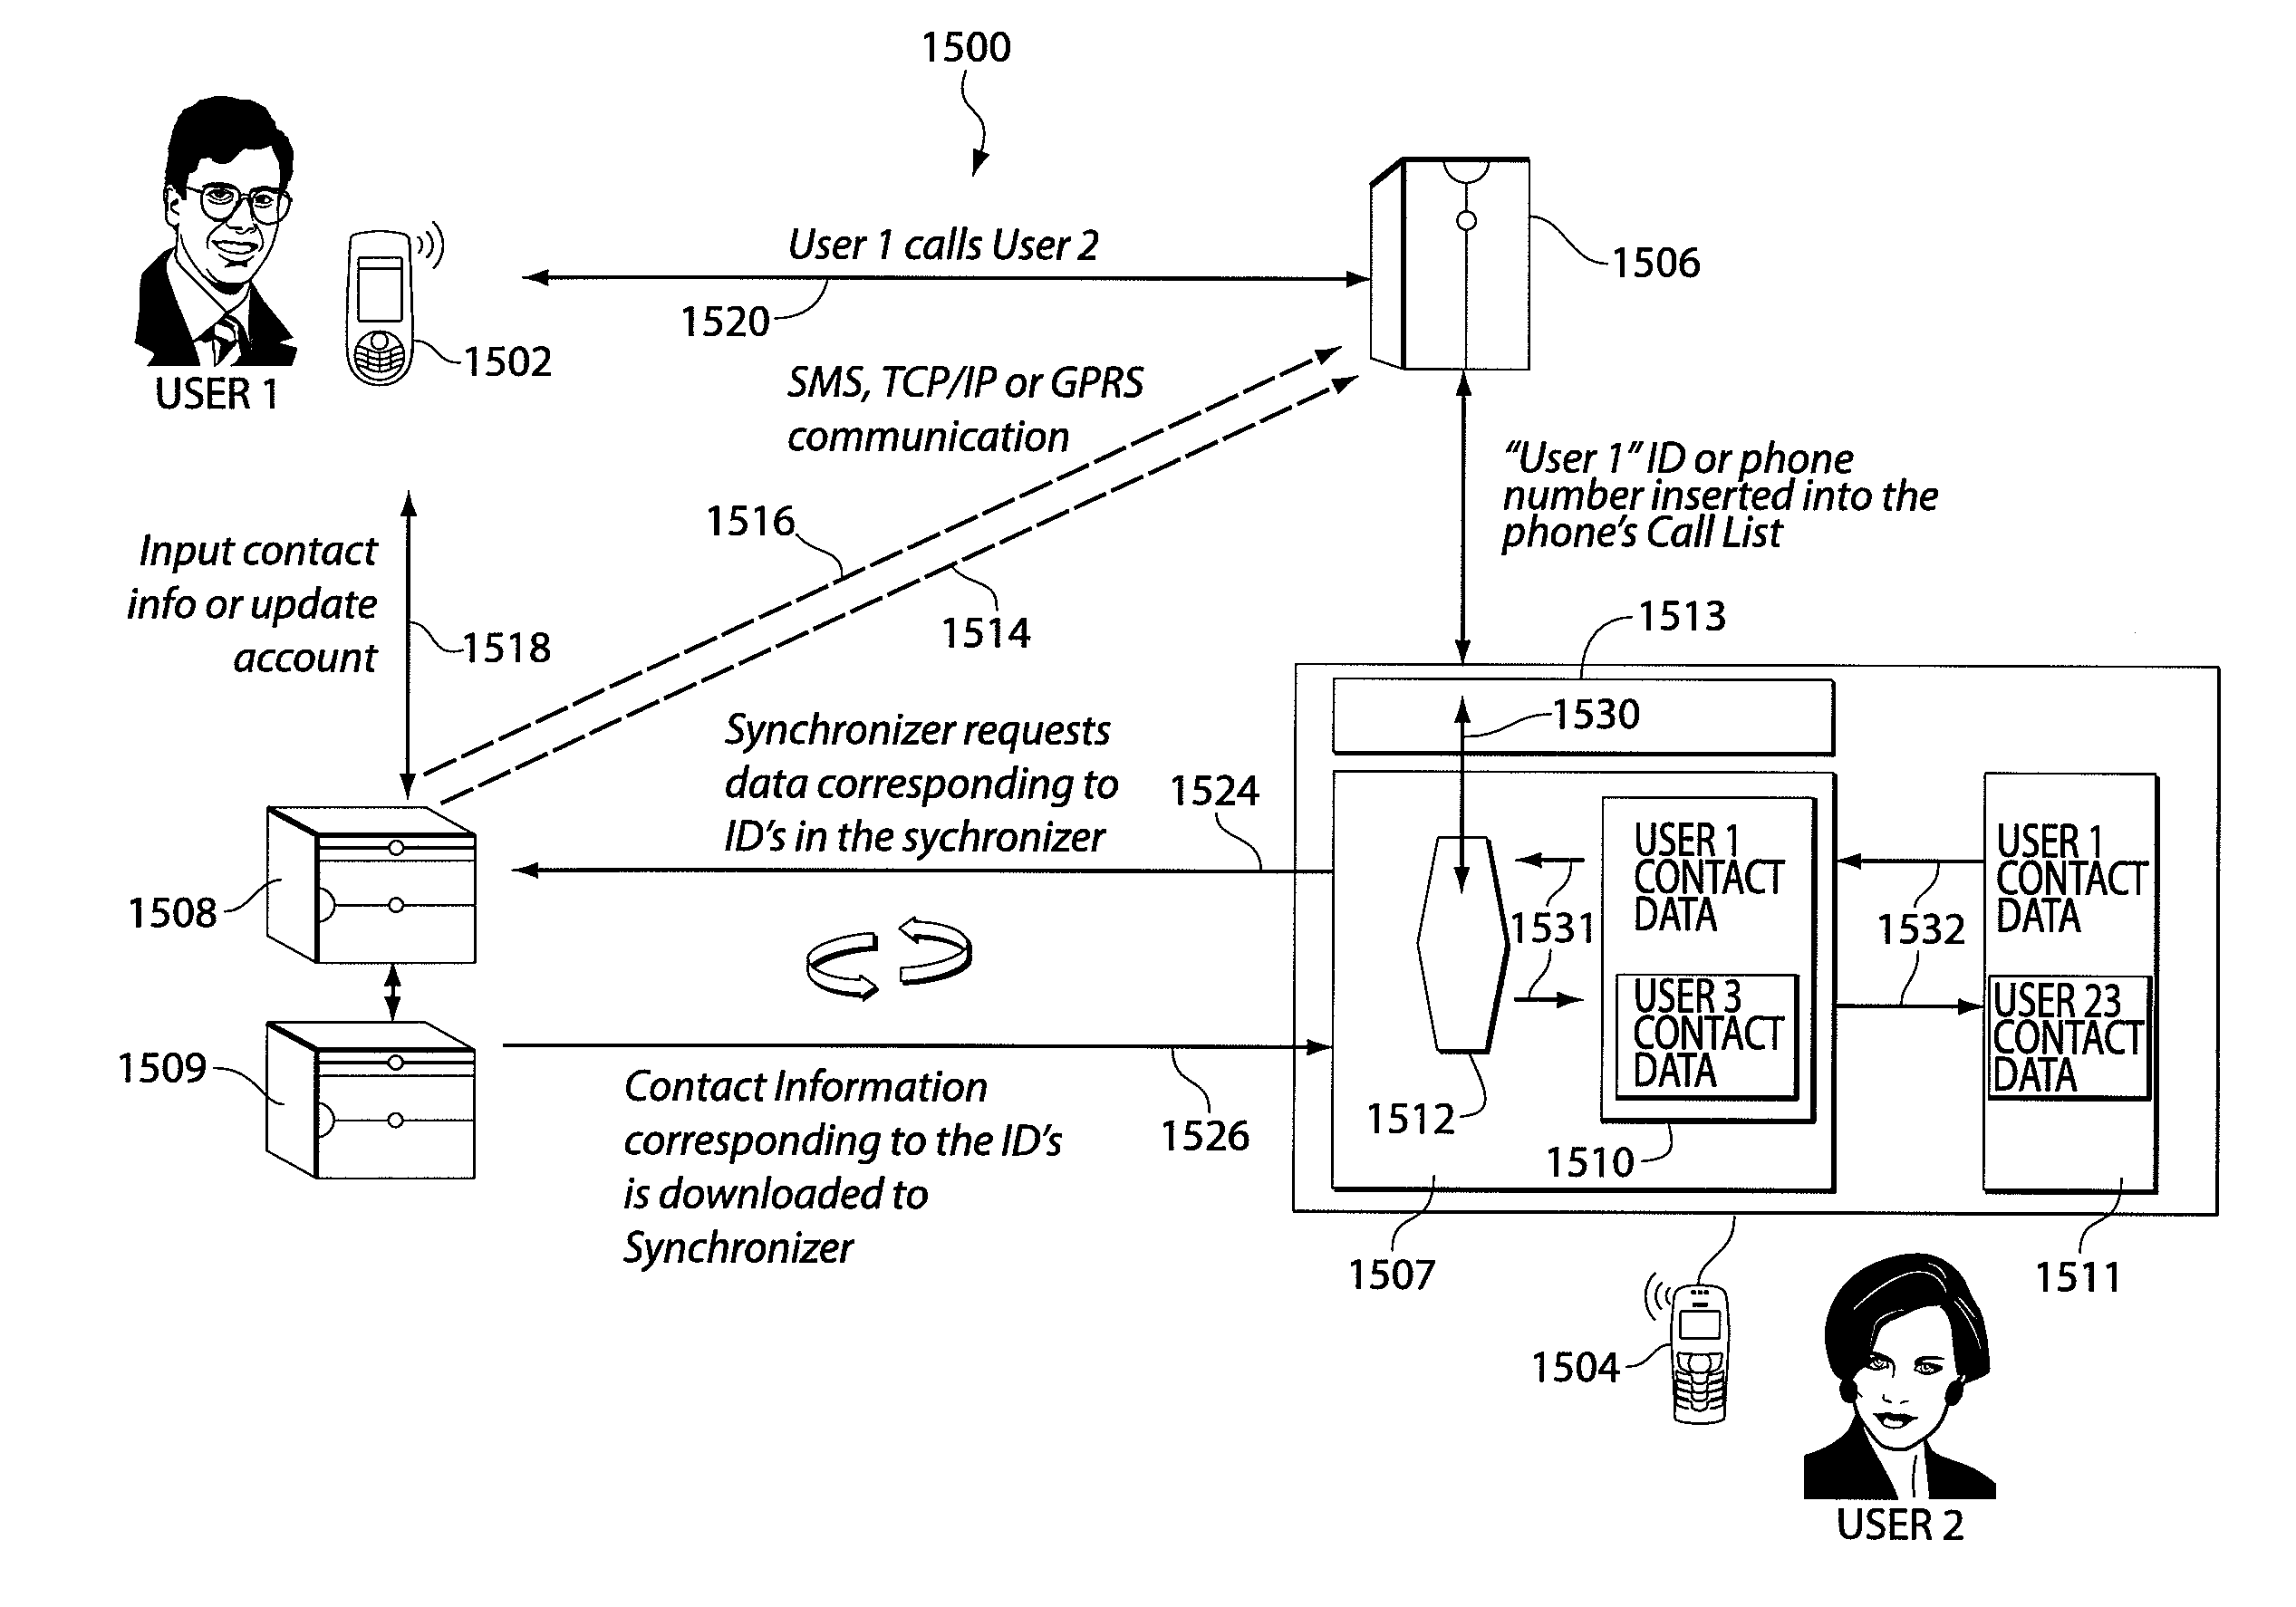 Method and apparatus for storing and retrieving business contact information in a computer system